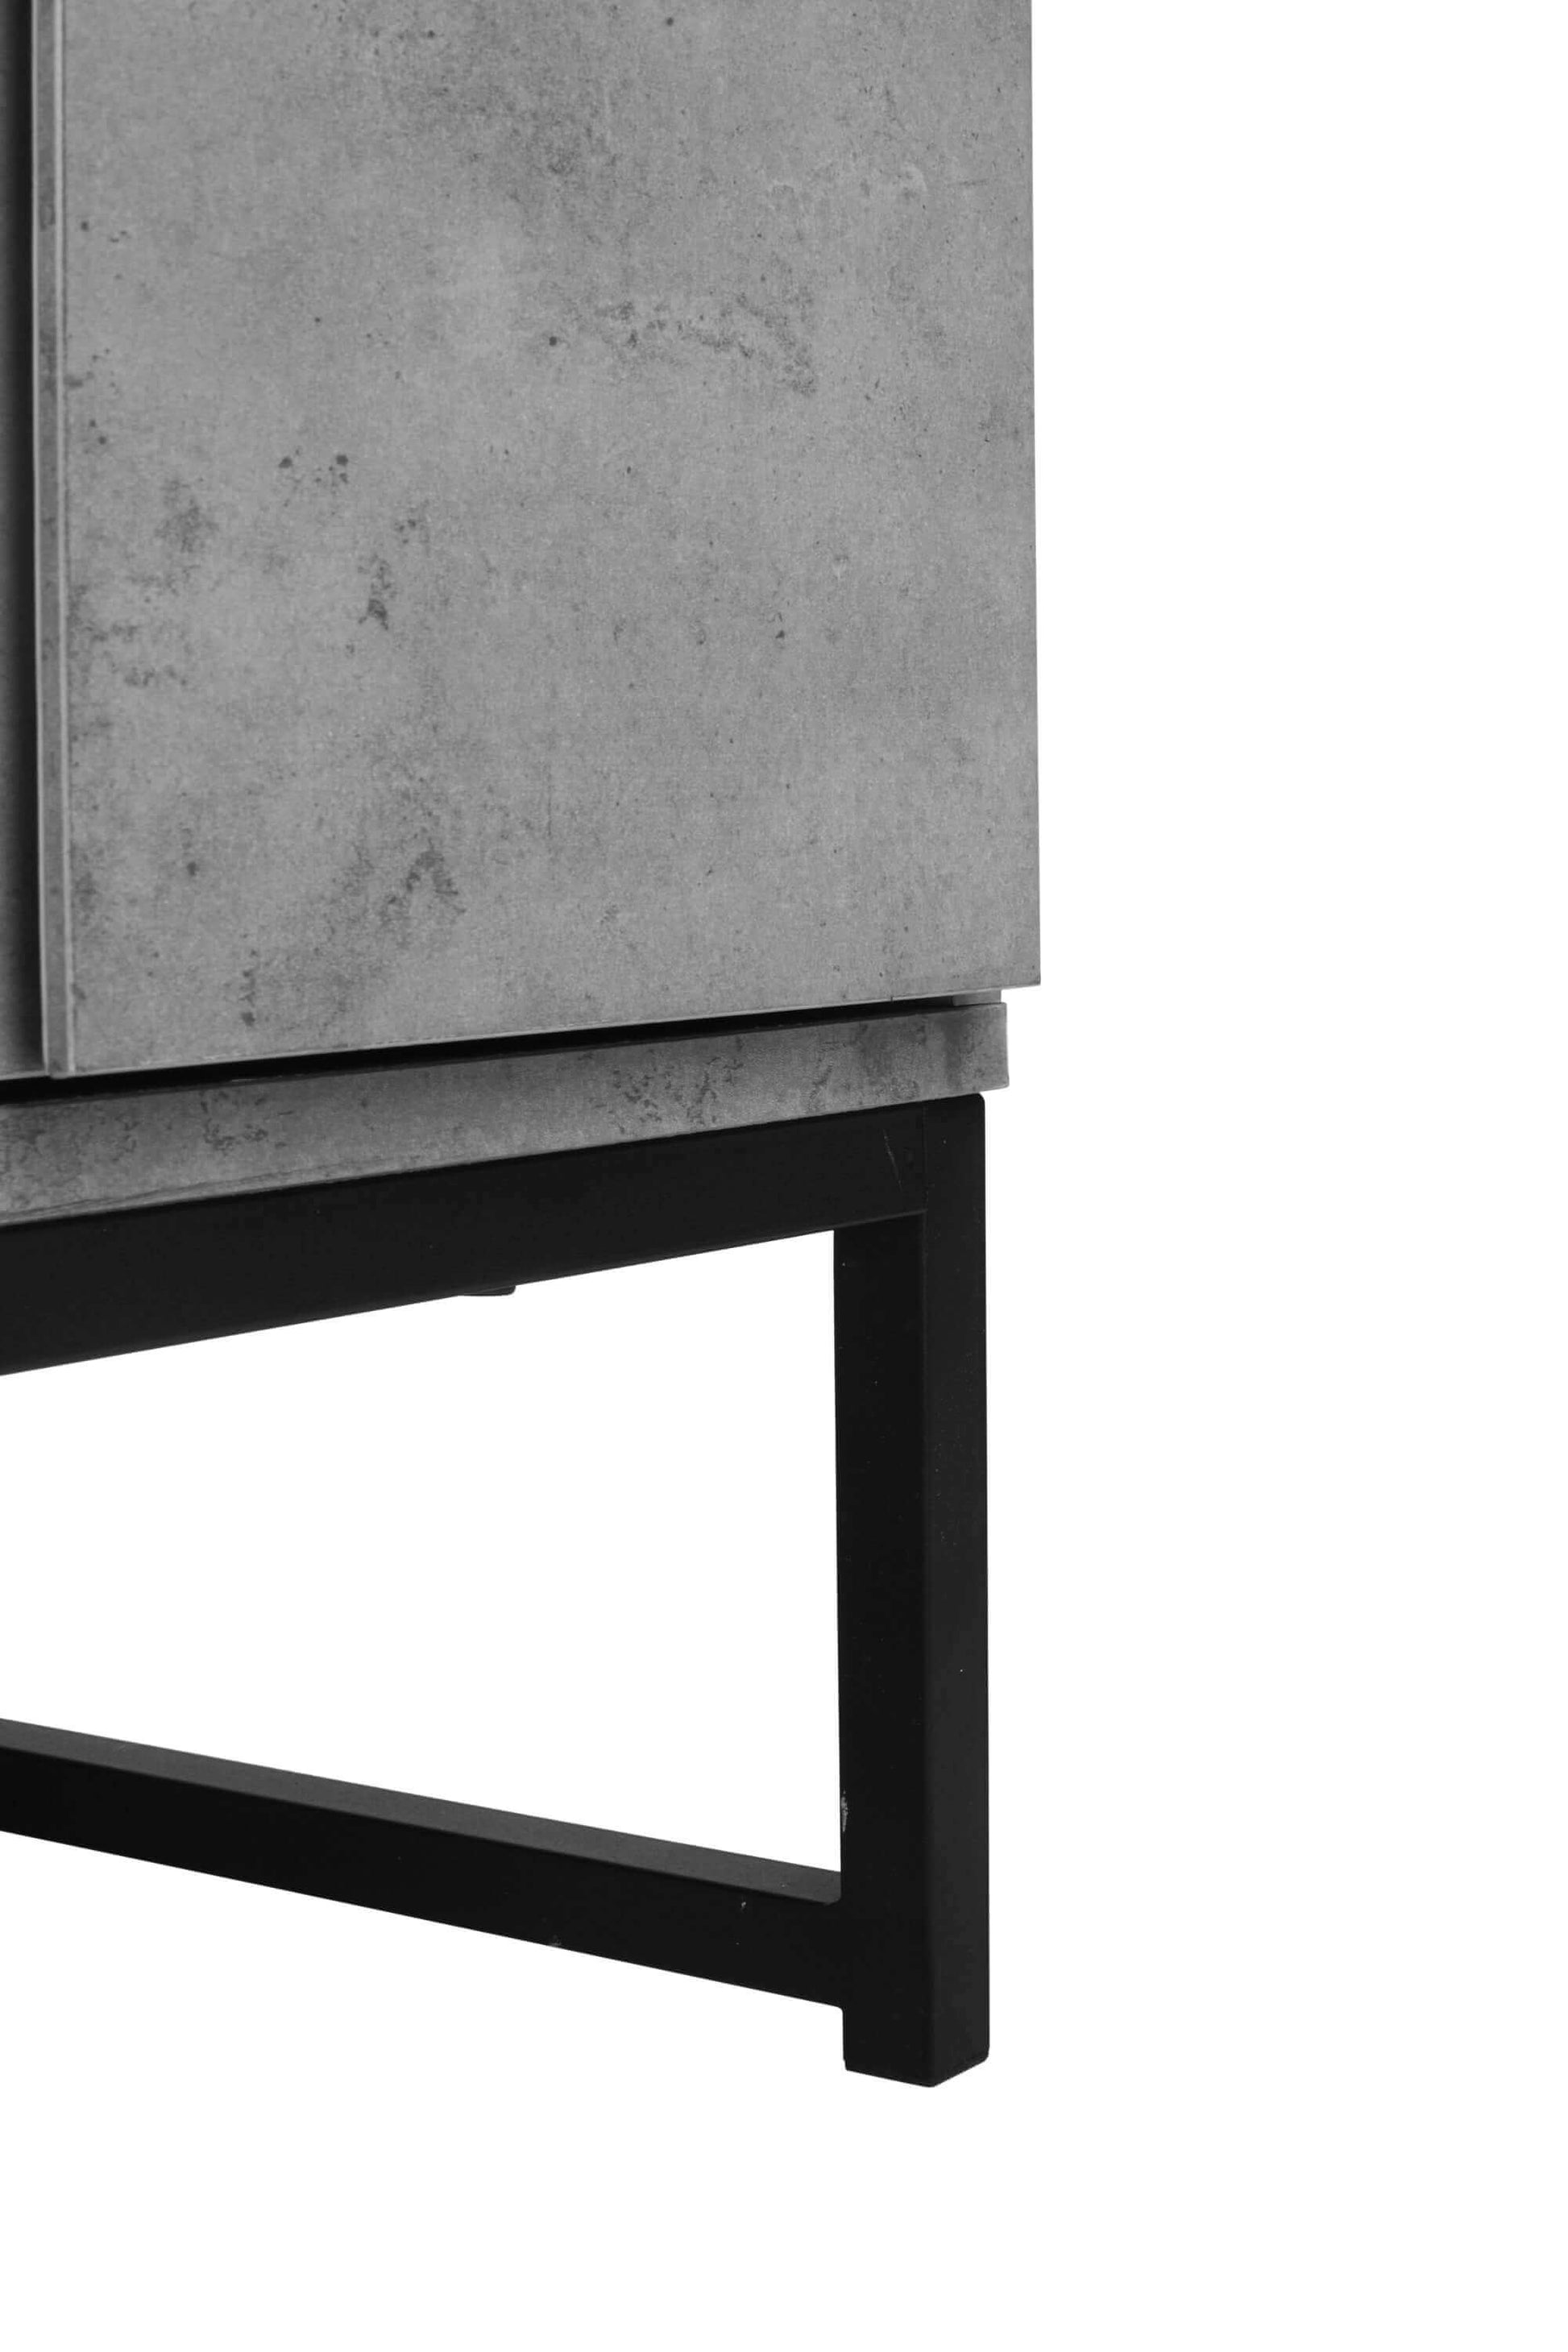 Industrial Geometric 2 Drawer Nightstand in Cement Gray - Revel Sofa 